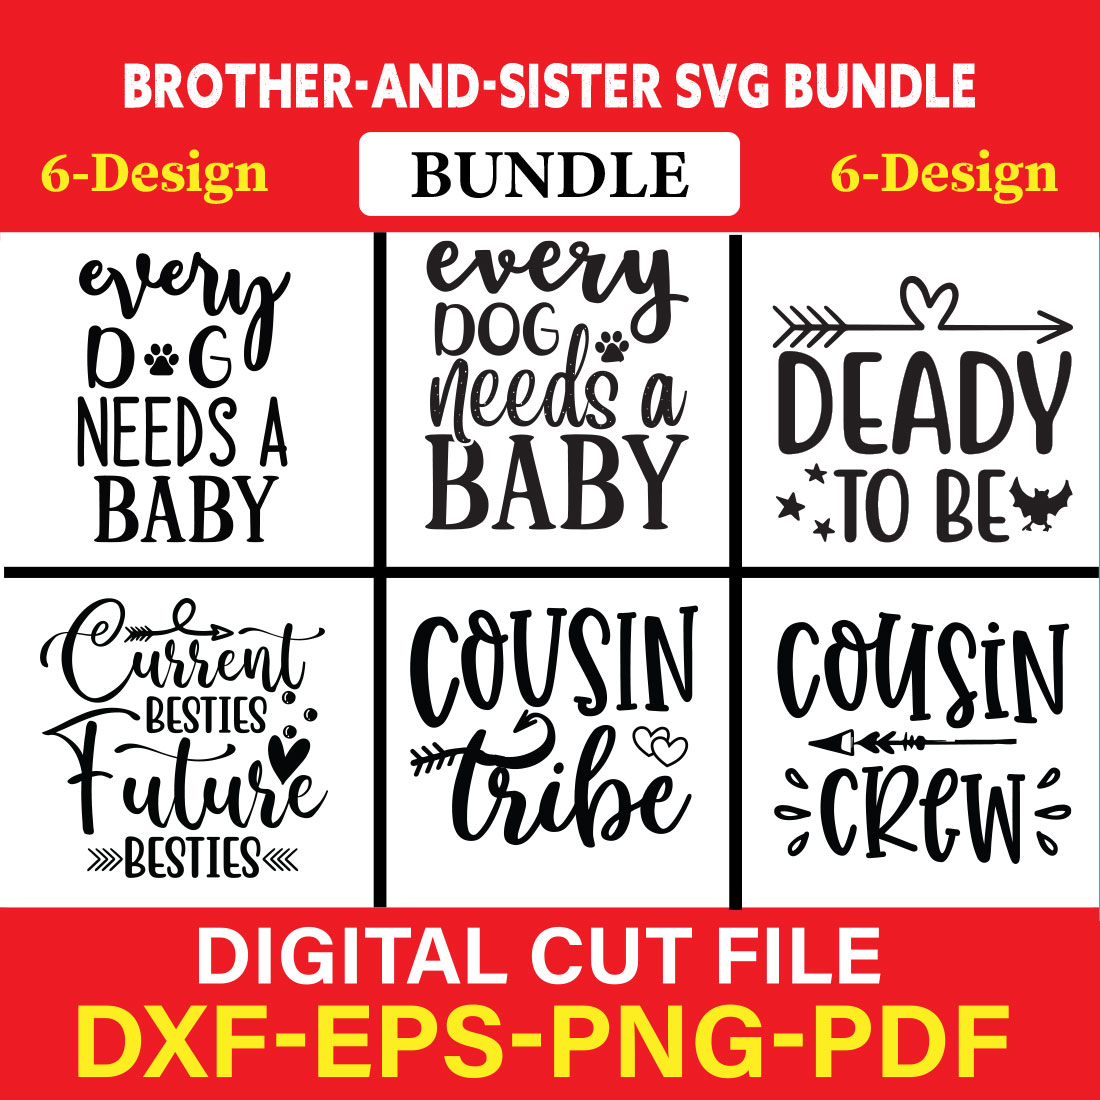 Brother-and-Sister T-shirt Design Bundle Vol-4 cover image.